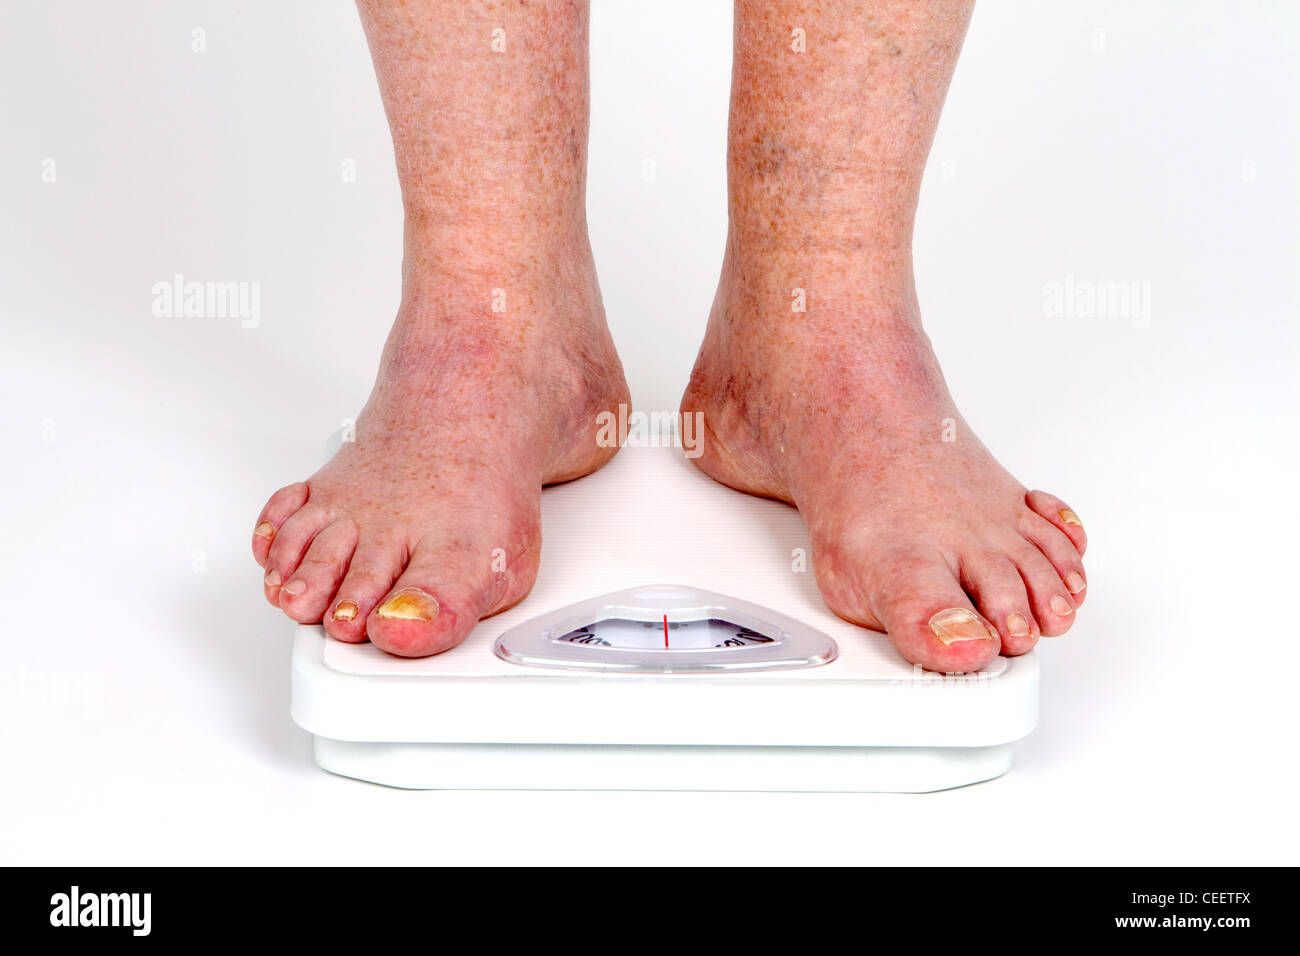 https://c8.alamy.com/comp/CEETFX/mature-mans-feet-on-scale-as-he-takes-his-weight-measurement-with-CEETFX.jpg